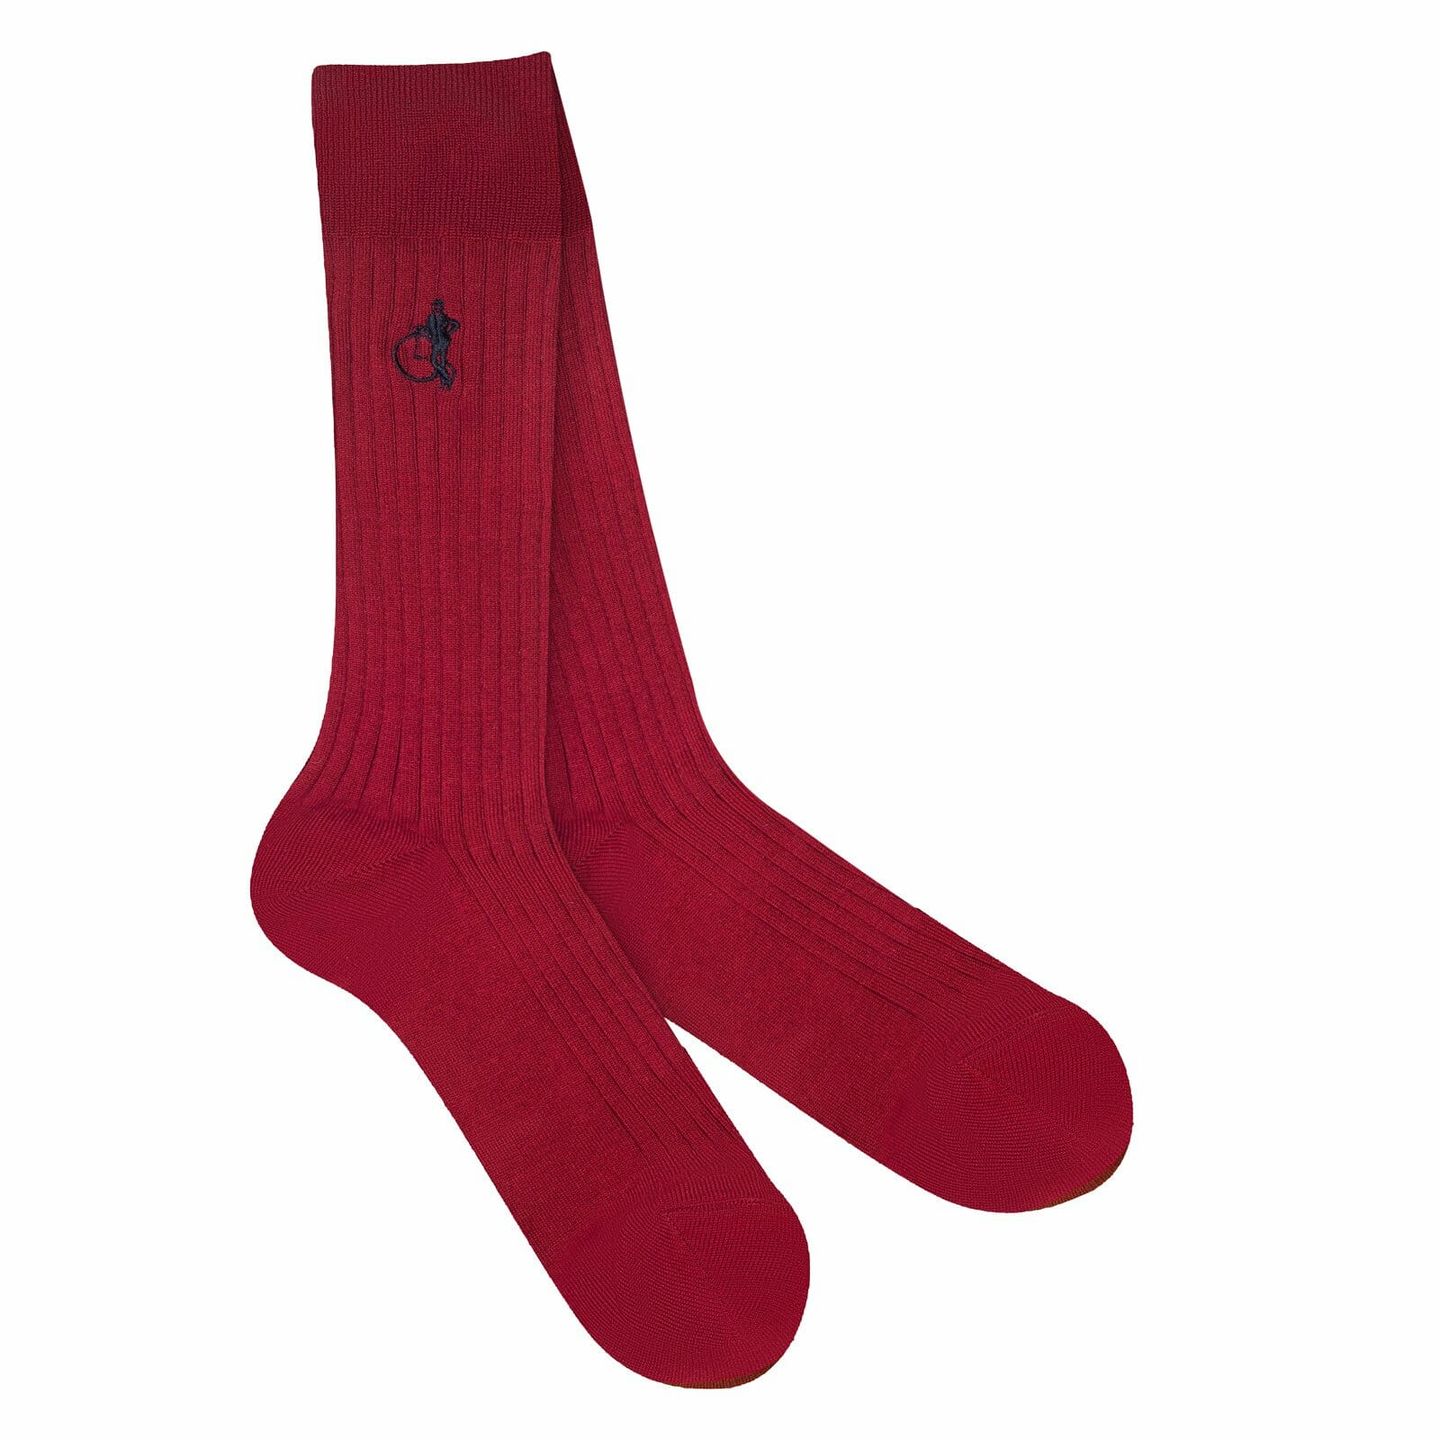 Ruby red sartorial socks with black LSC logo